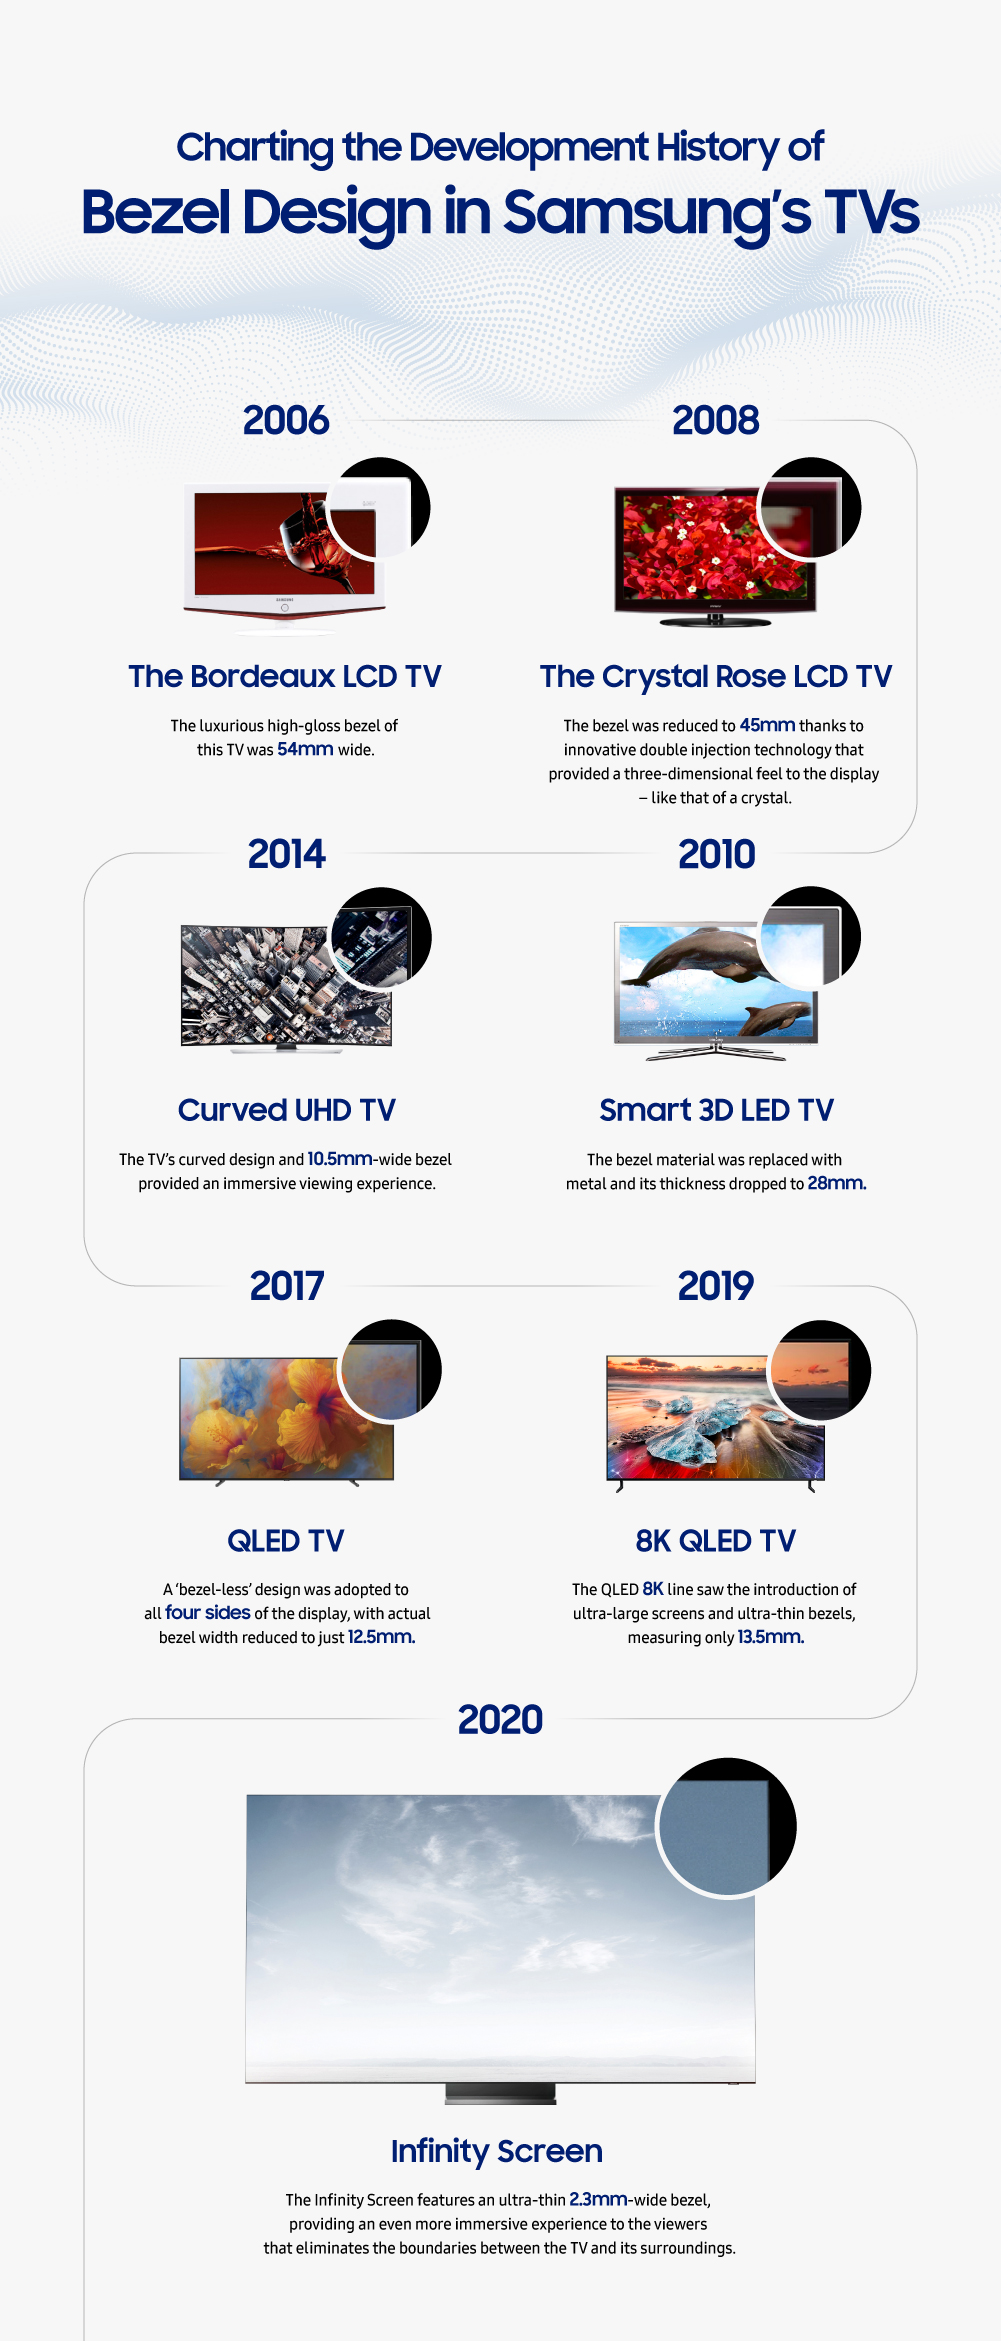 Video] Samsung TV throughout the Past Ten Years: History of